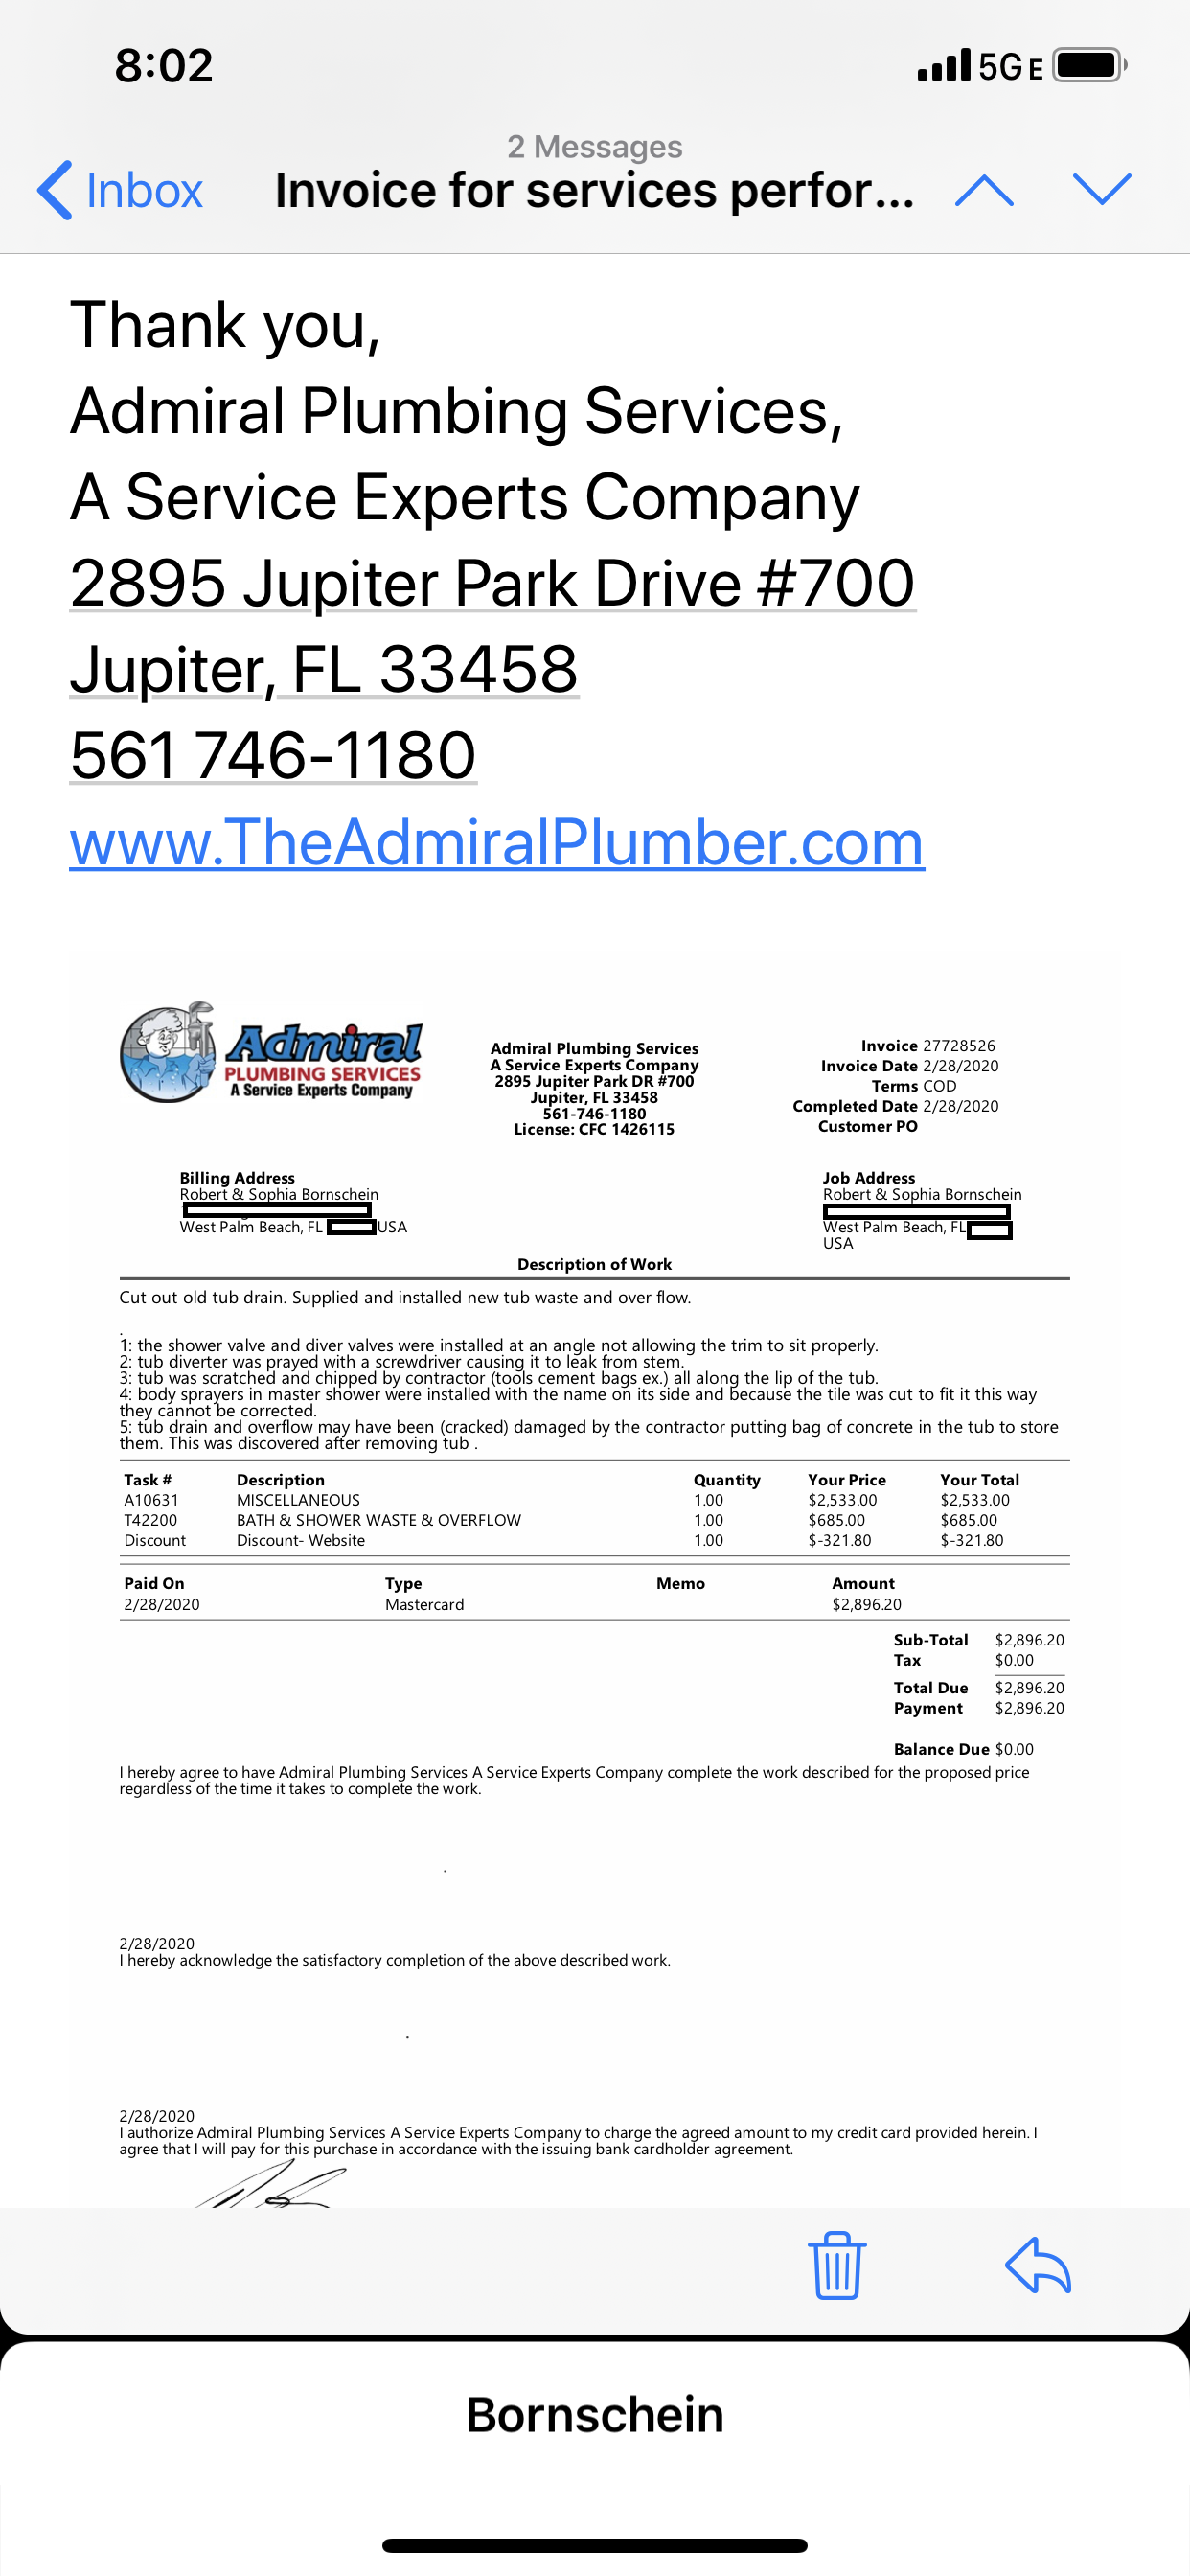 New Plumbers invoice to fix leak caused